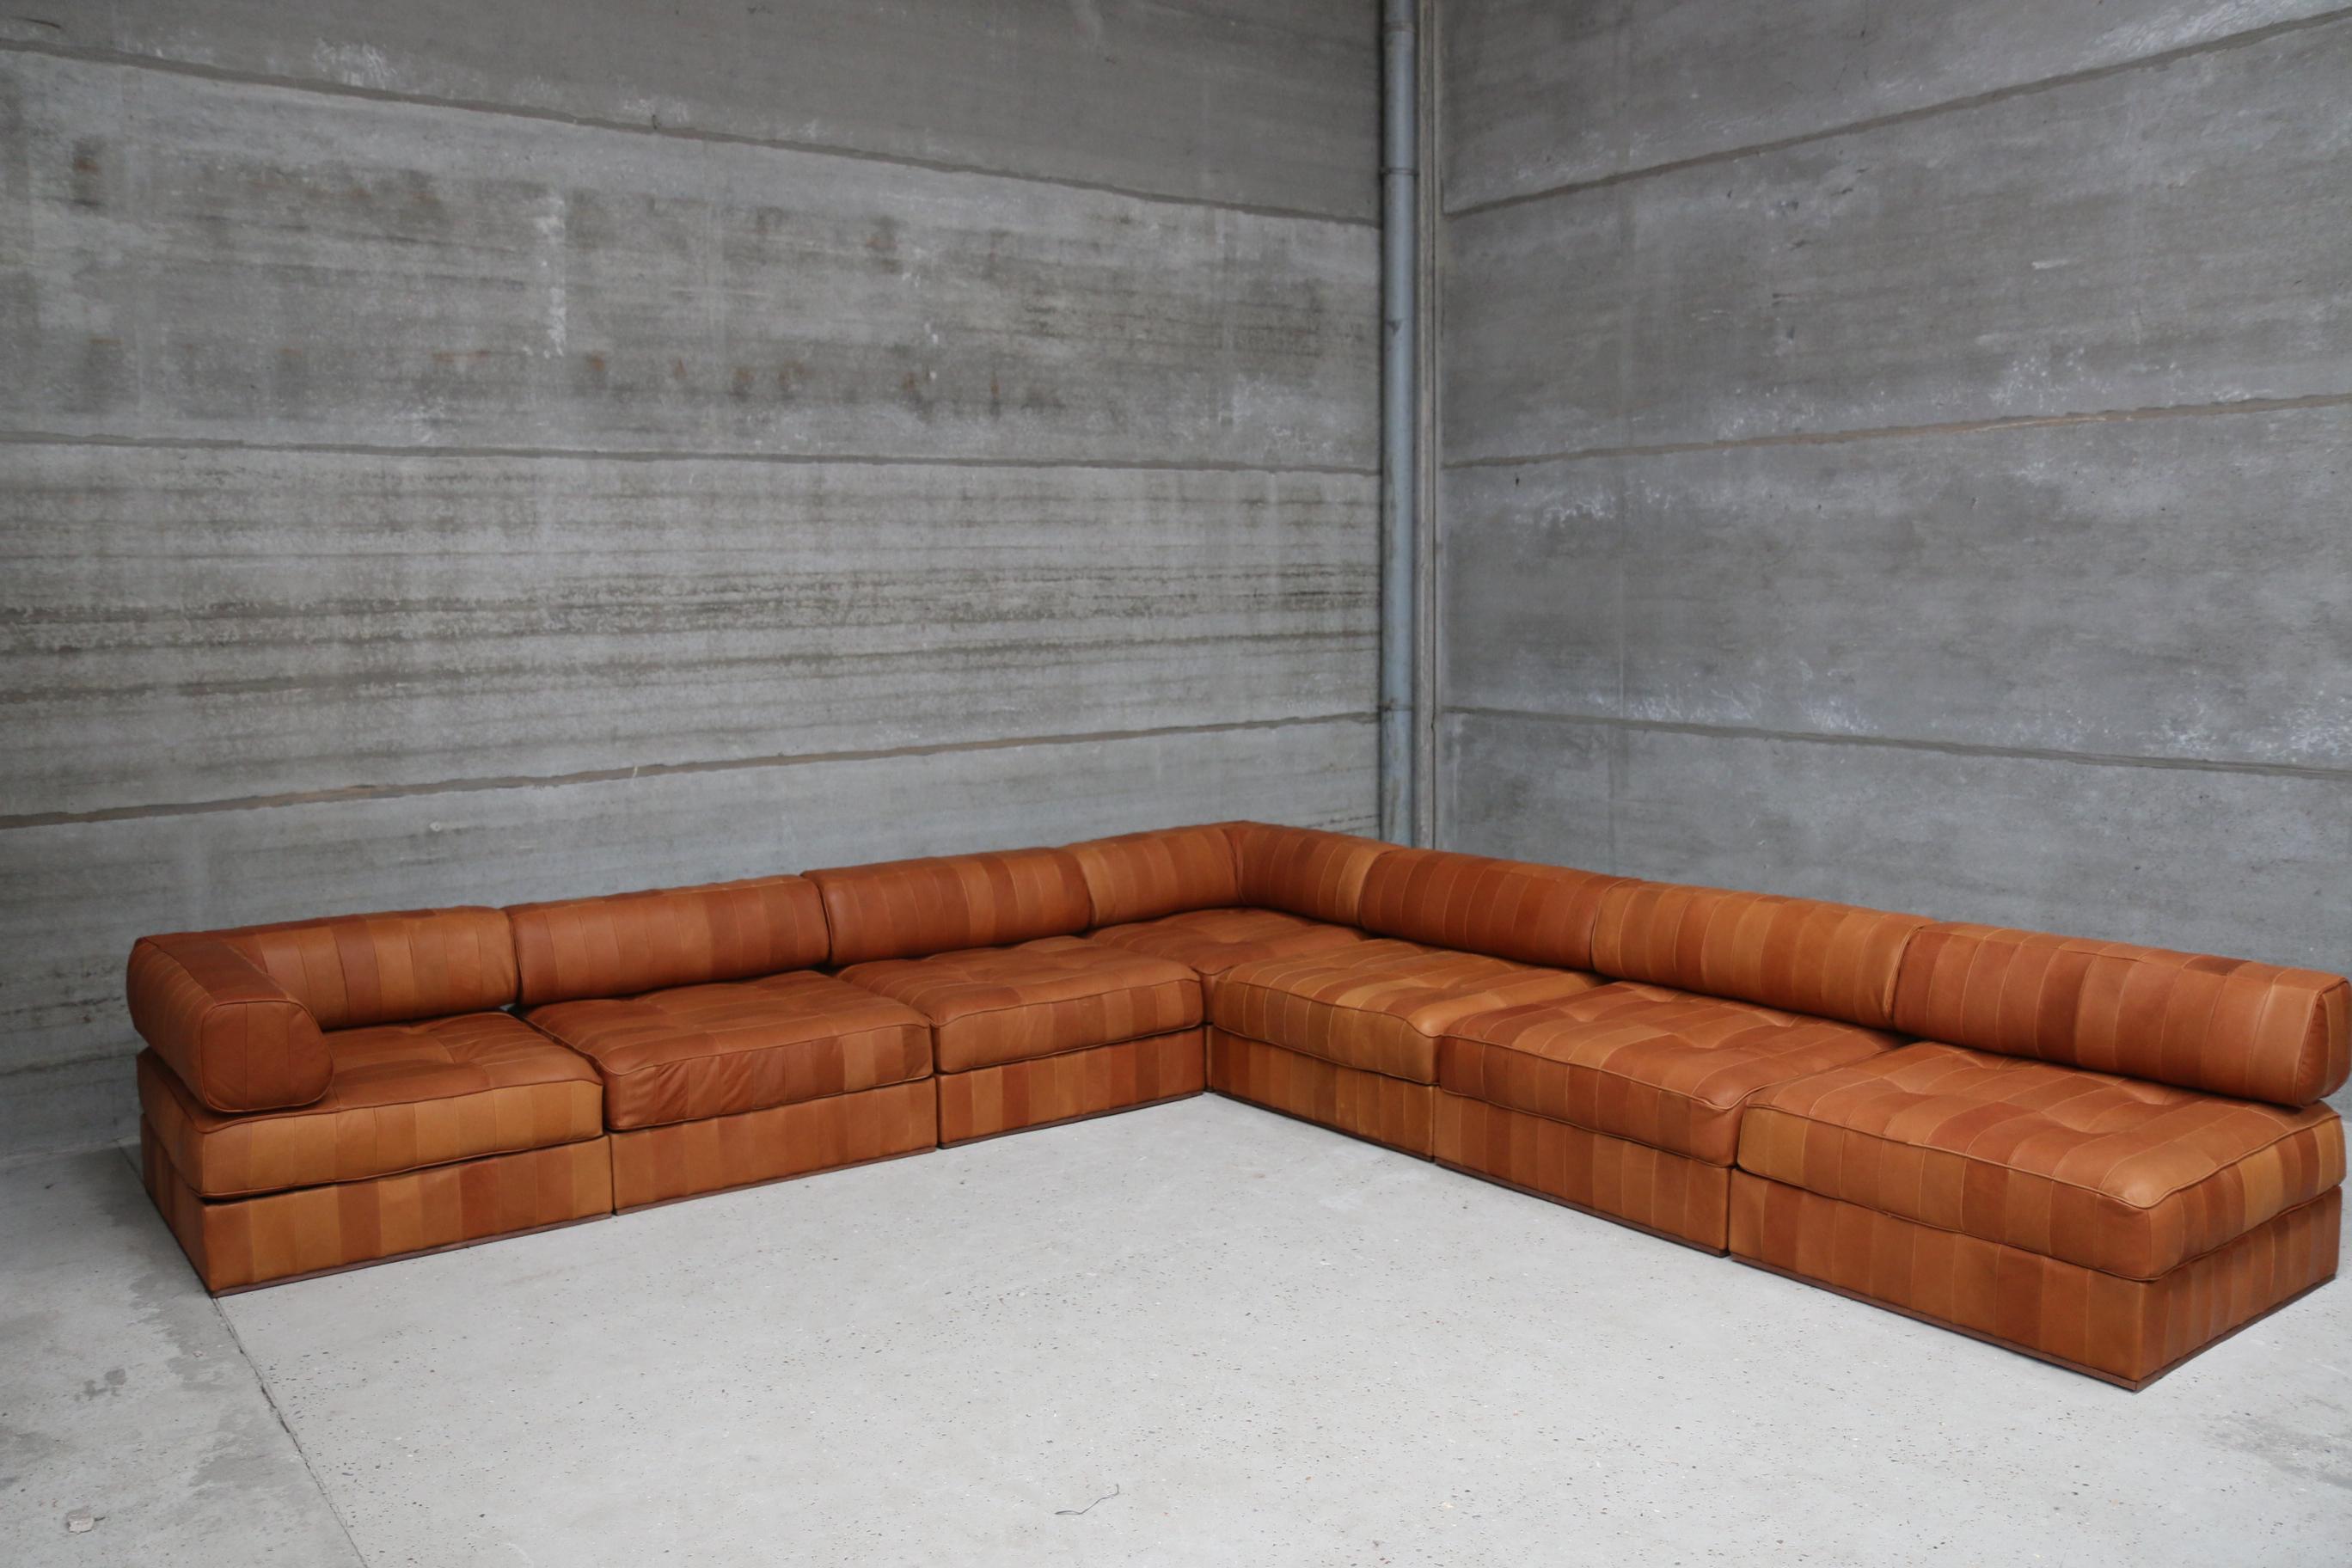 Iconic ds88 modular patchwork sofa restored in our signature vintage aniline leather. New quality foam and new leather. You can play with the modular composition of the sofa. This set consists of 7 modules, 5 normal modules and 2 corner L